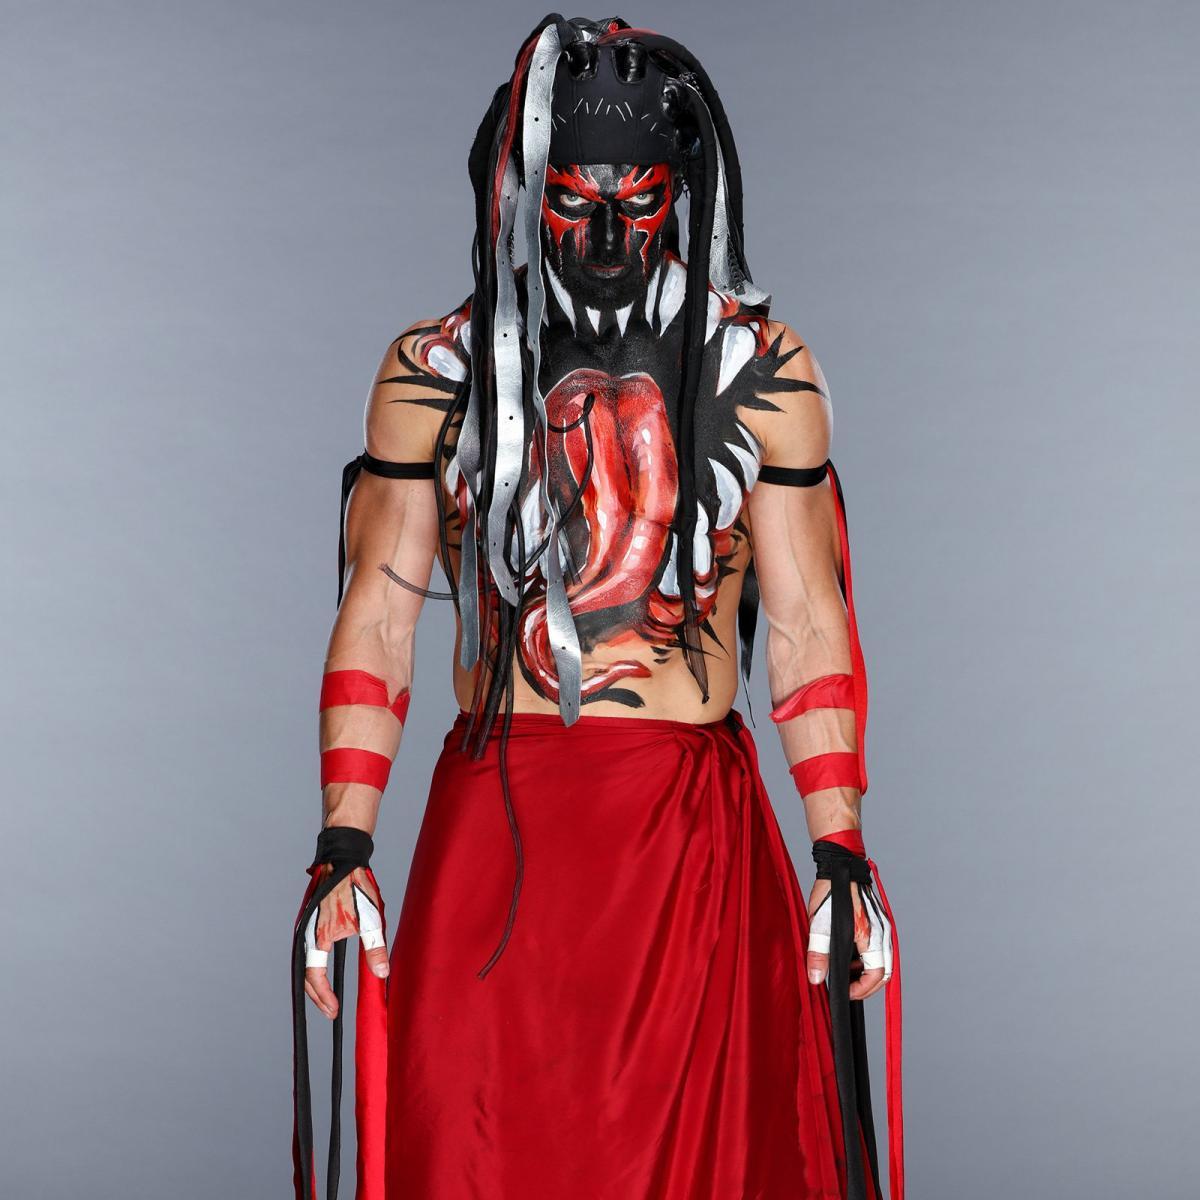 Check Out An Awesome Gallery Of Photo Featuring Finn Balor's